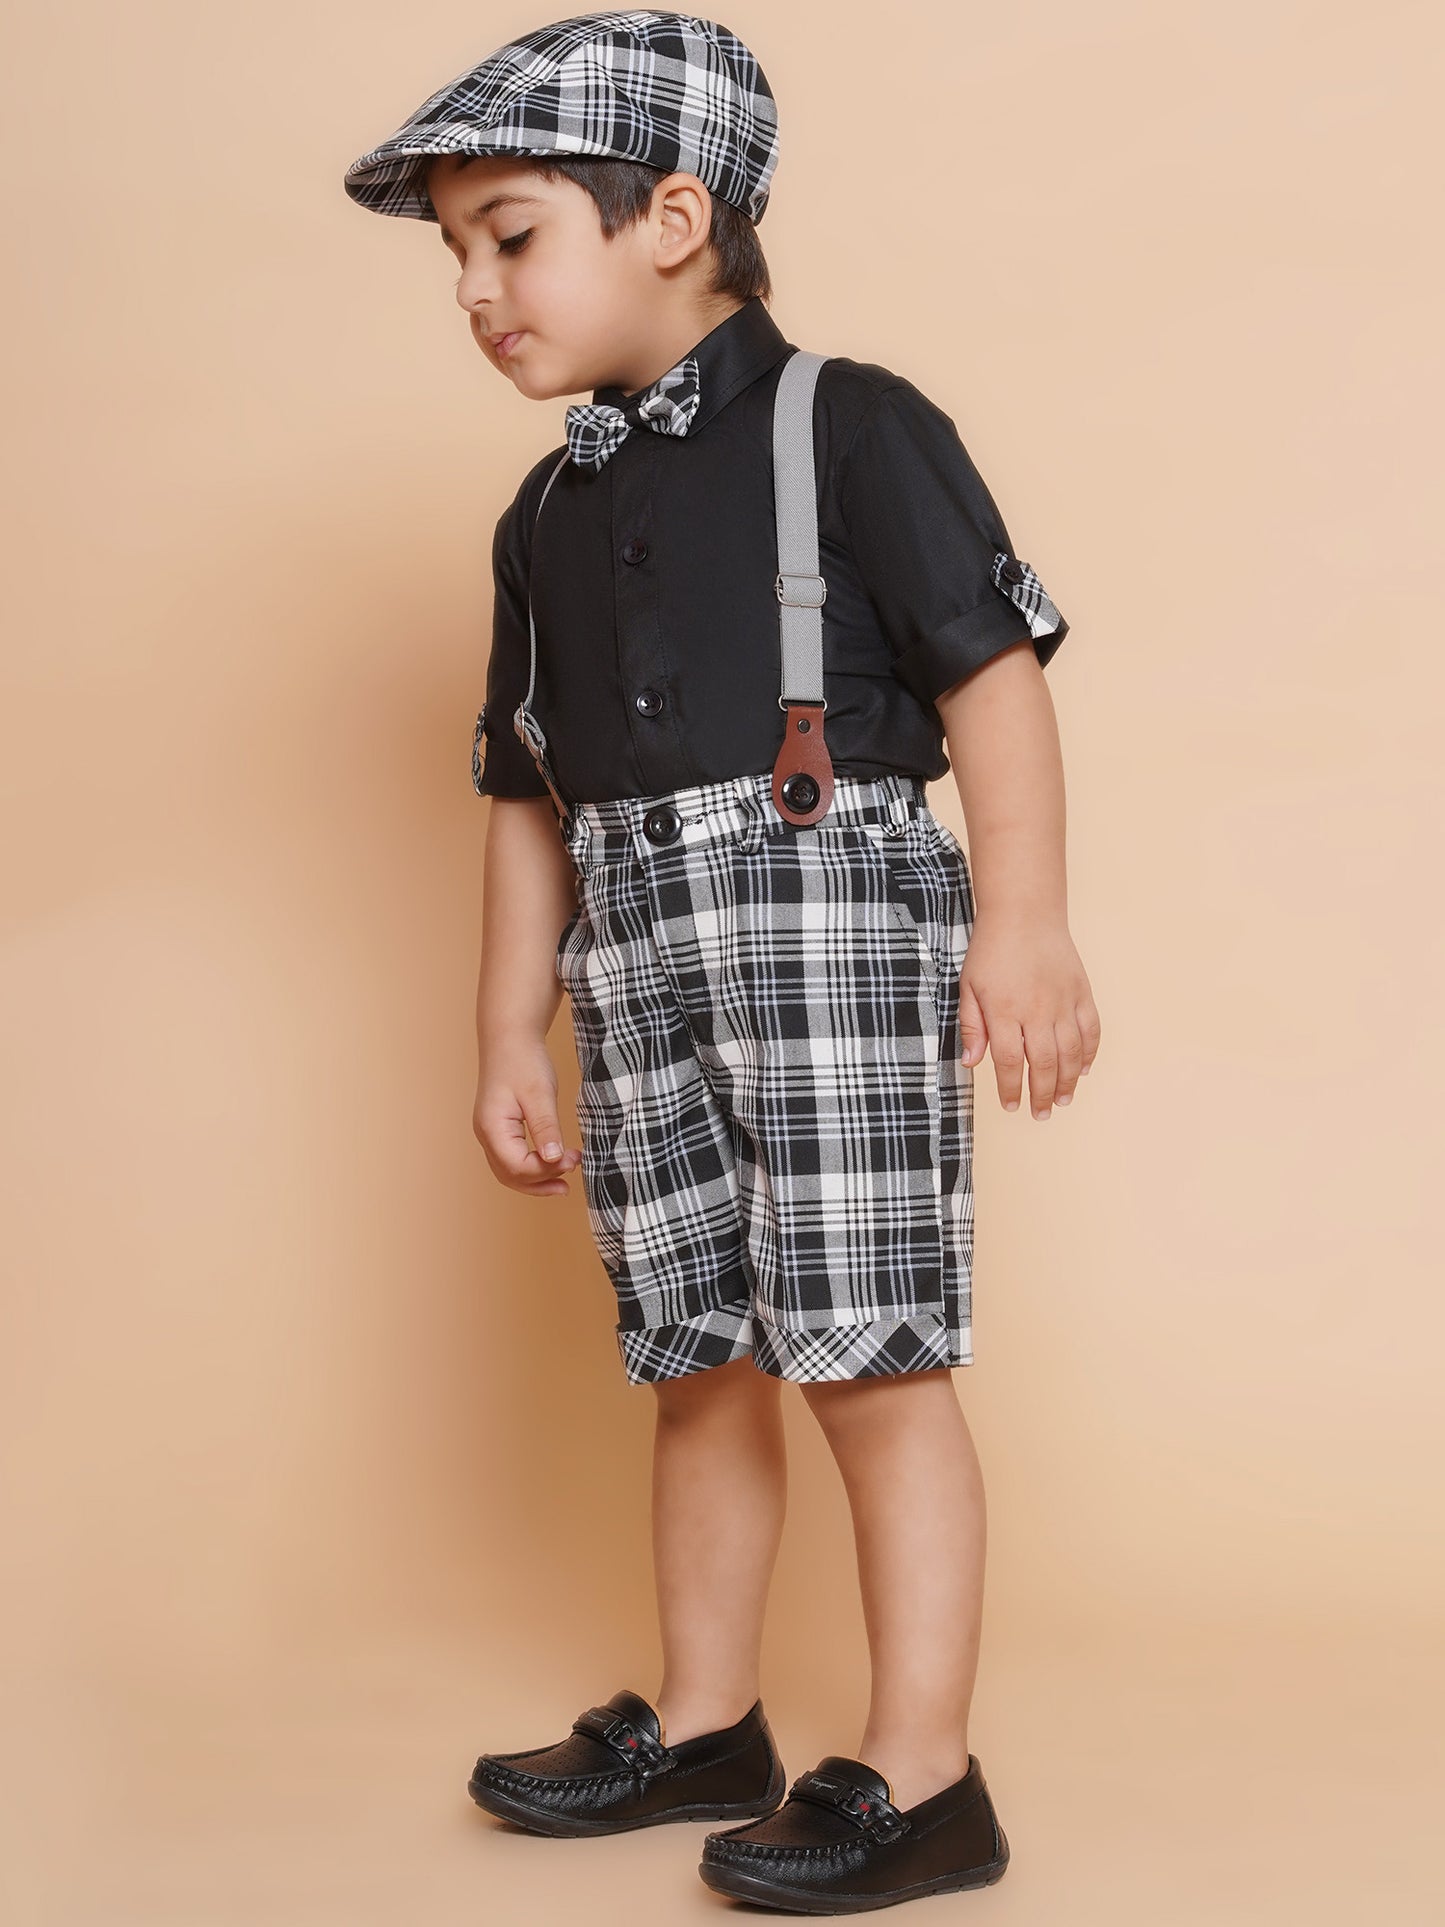 Boys Kids White Cotton Printed Shirt Shorts With Cap and Suspender Set